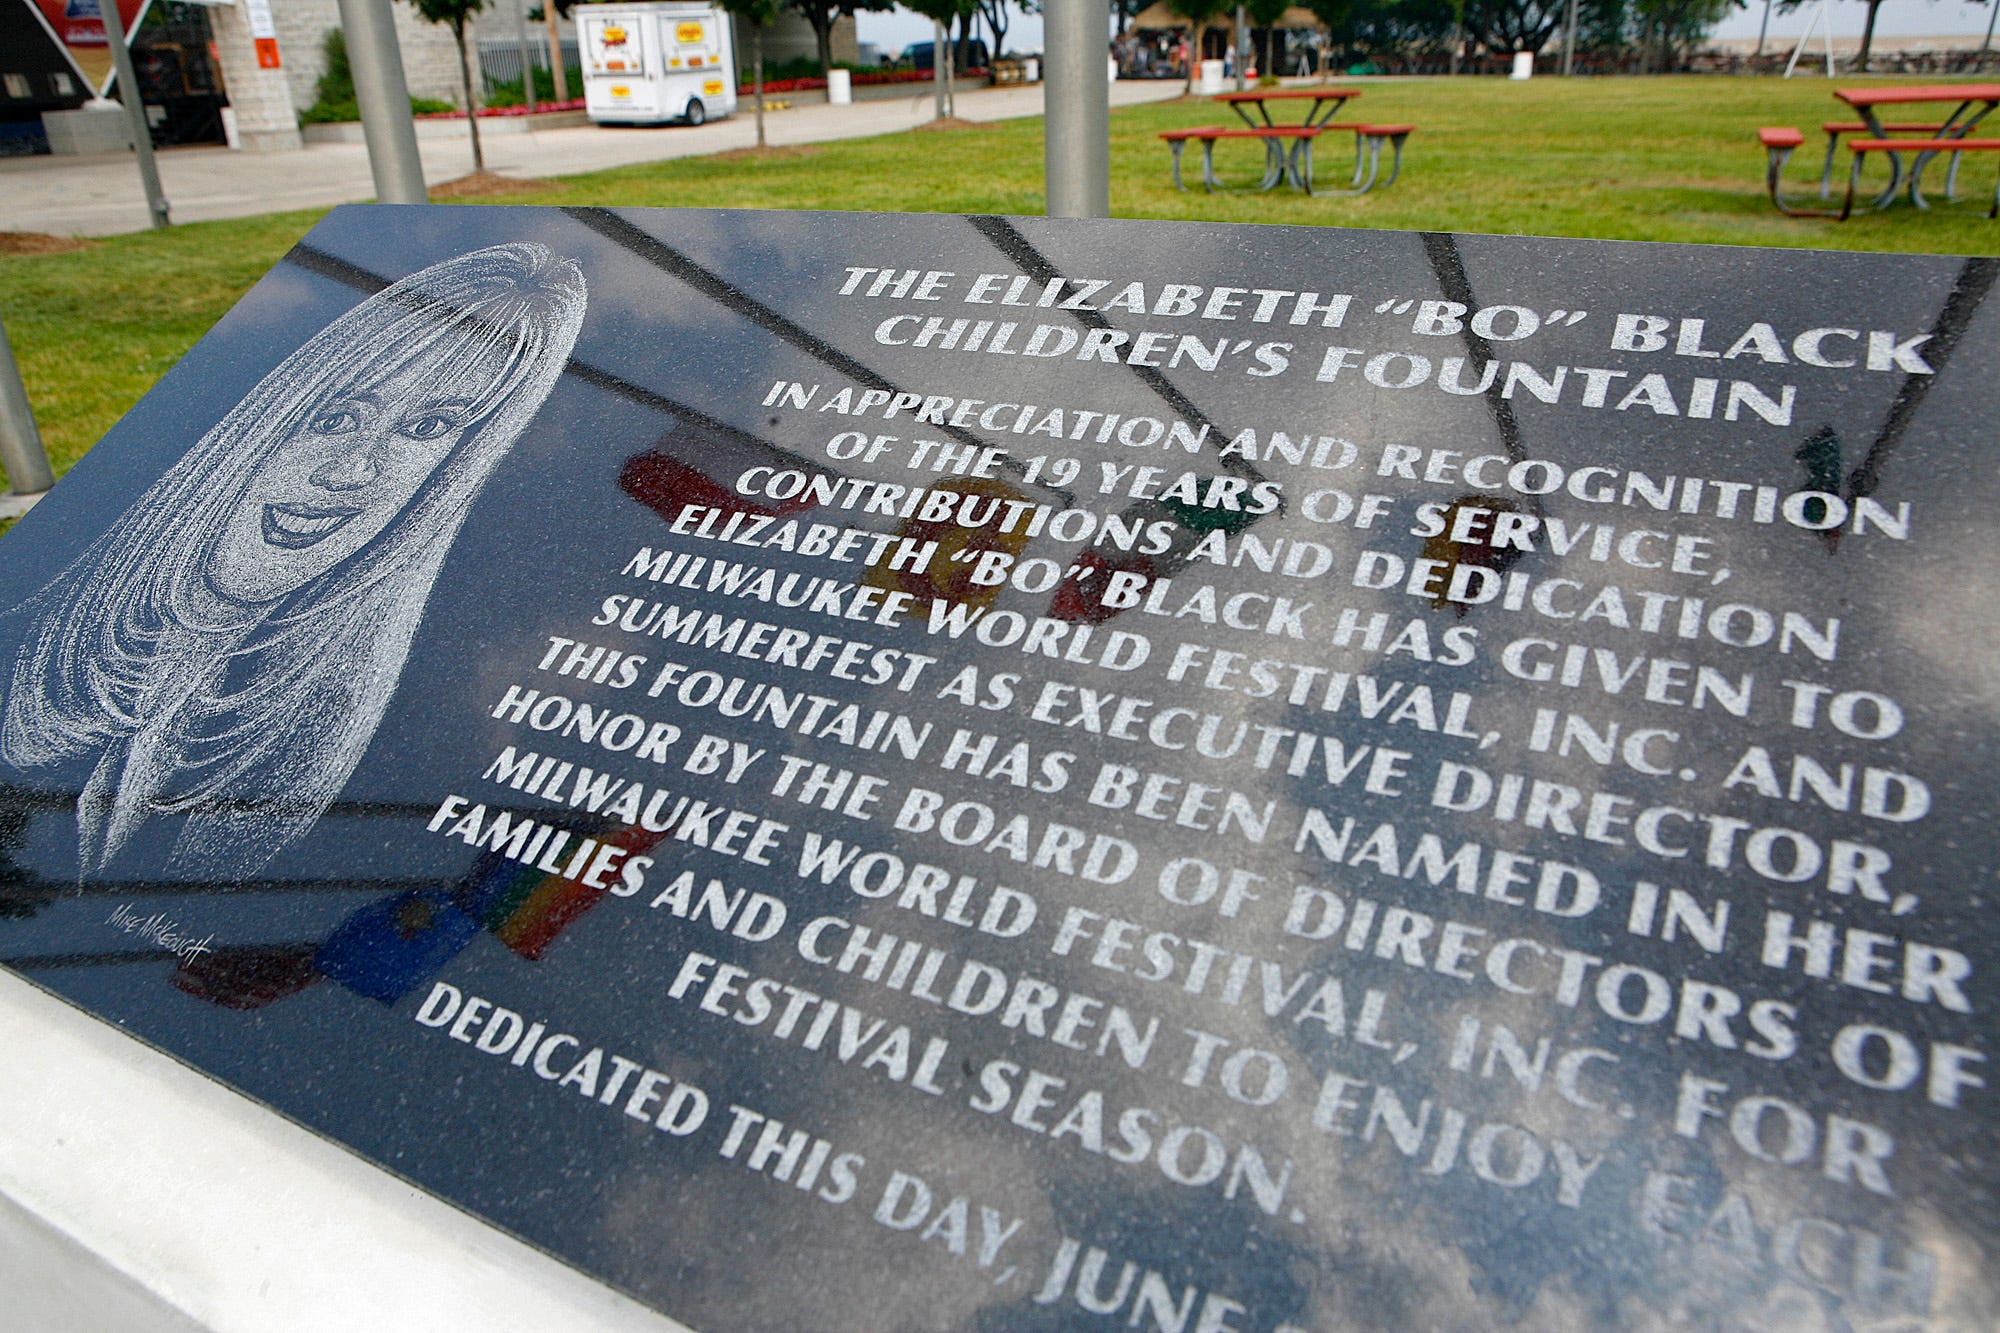 The granite plaque dedicated on the Summerfest grounds is shown June 26, 2007. The Elizabeth "Bo" Black Children's fountain honors Black for her 19 years as Summerfest director.